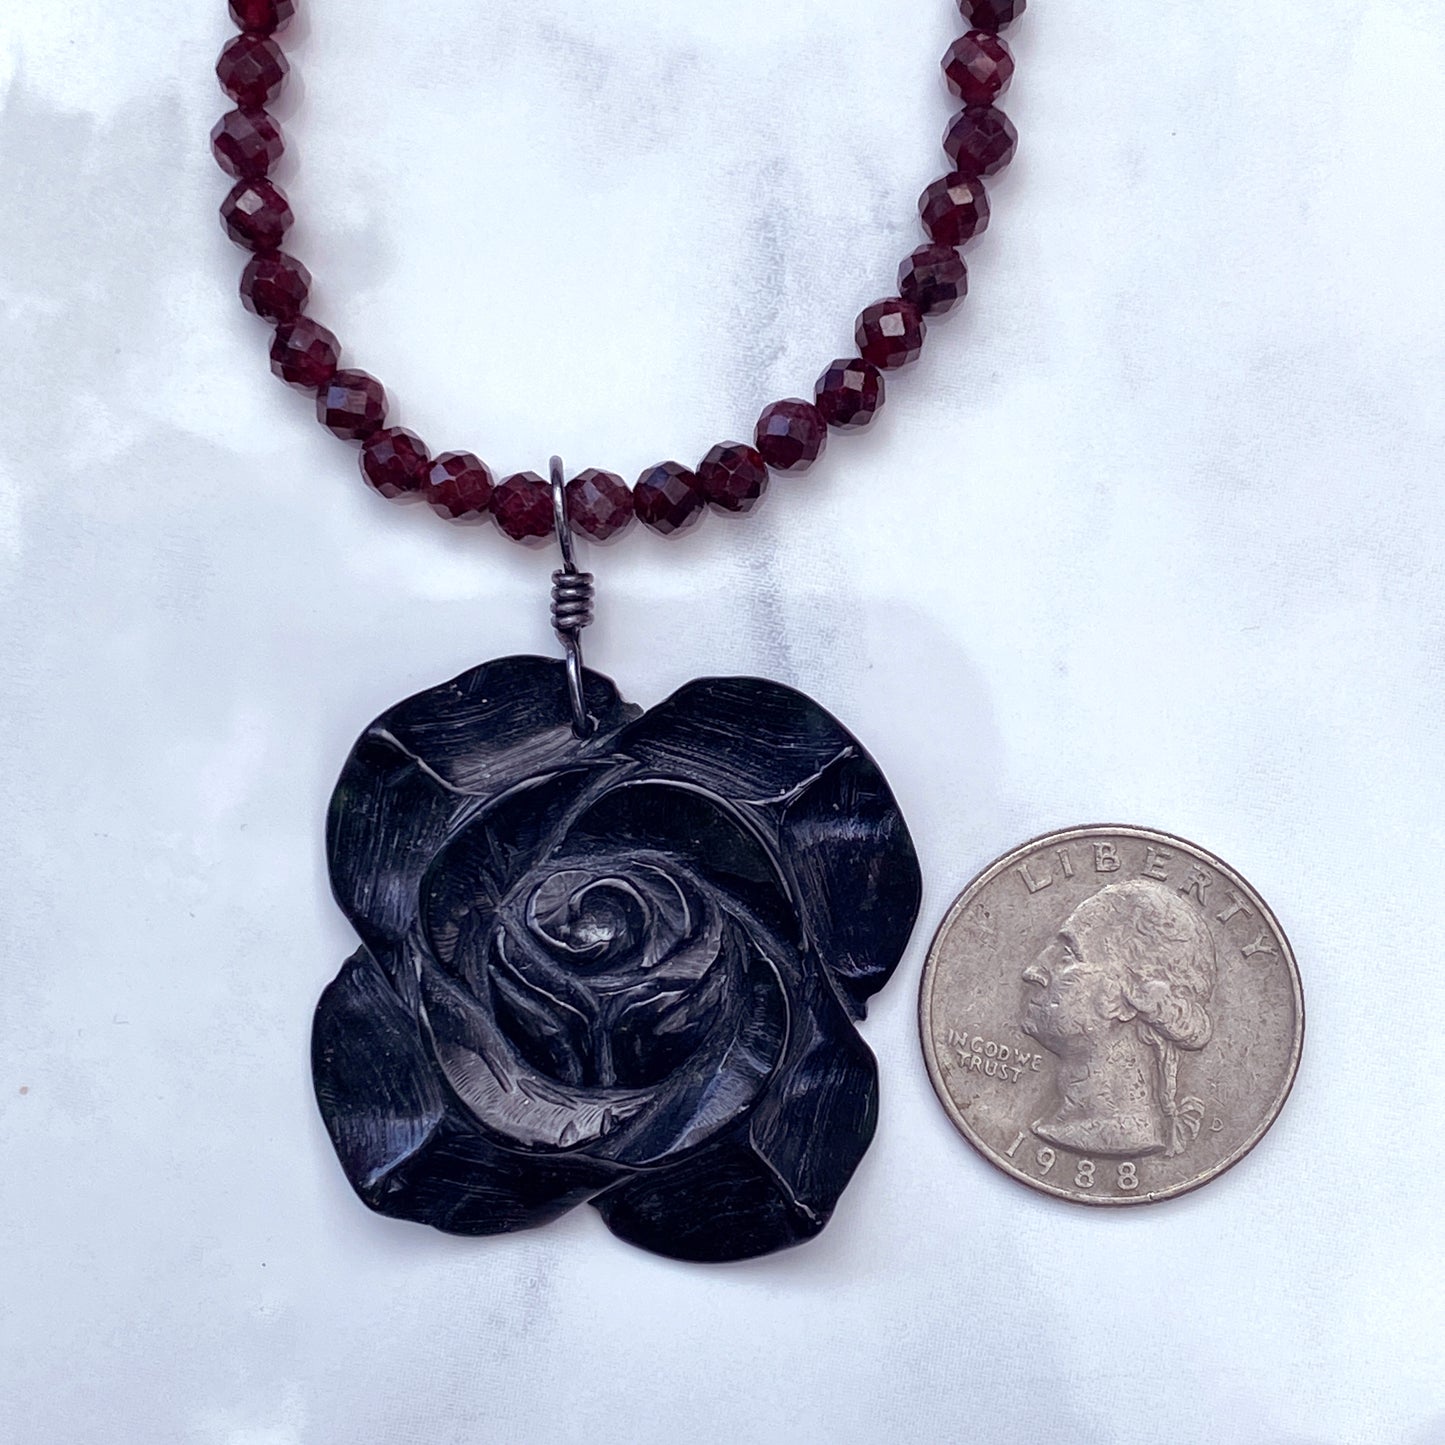 Faceted Garnets with Black Rose Jade Pendant and Oxidized Sterling Silver